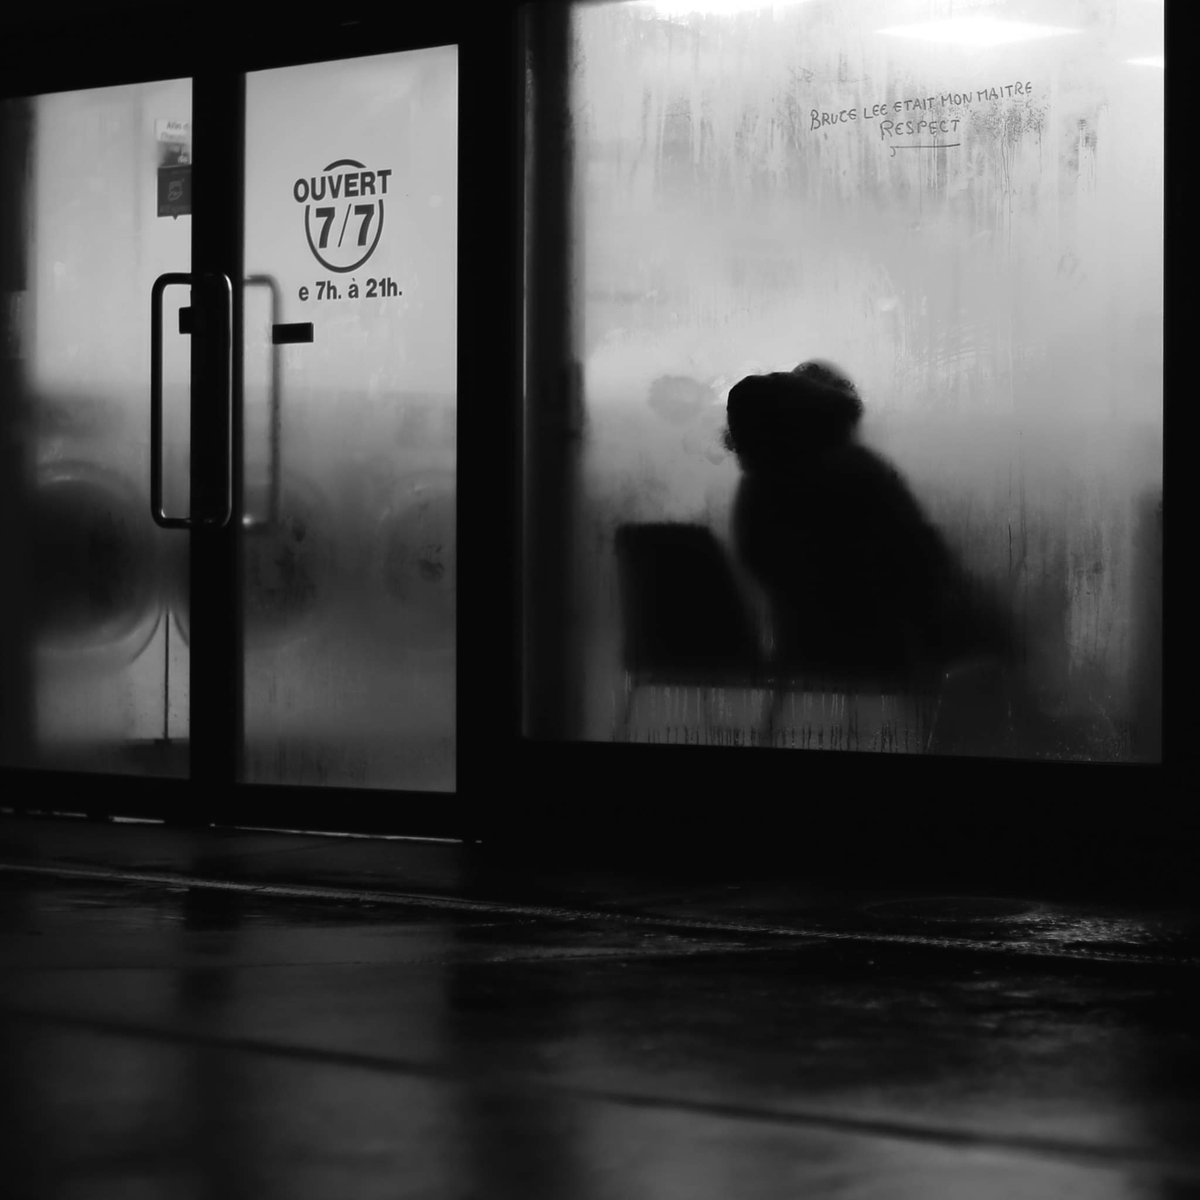 Behind the foggy window 
#streetphotography #street #blackandwhite #Paris #pascalcolin #canon #50mm